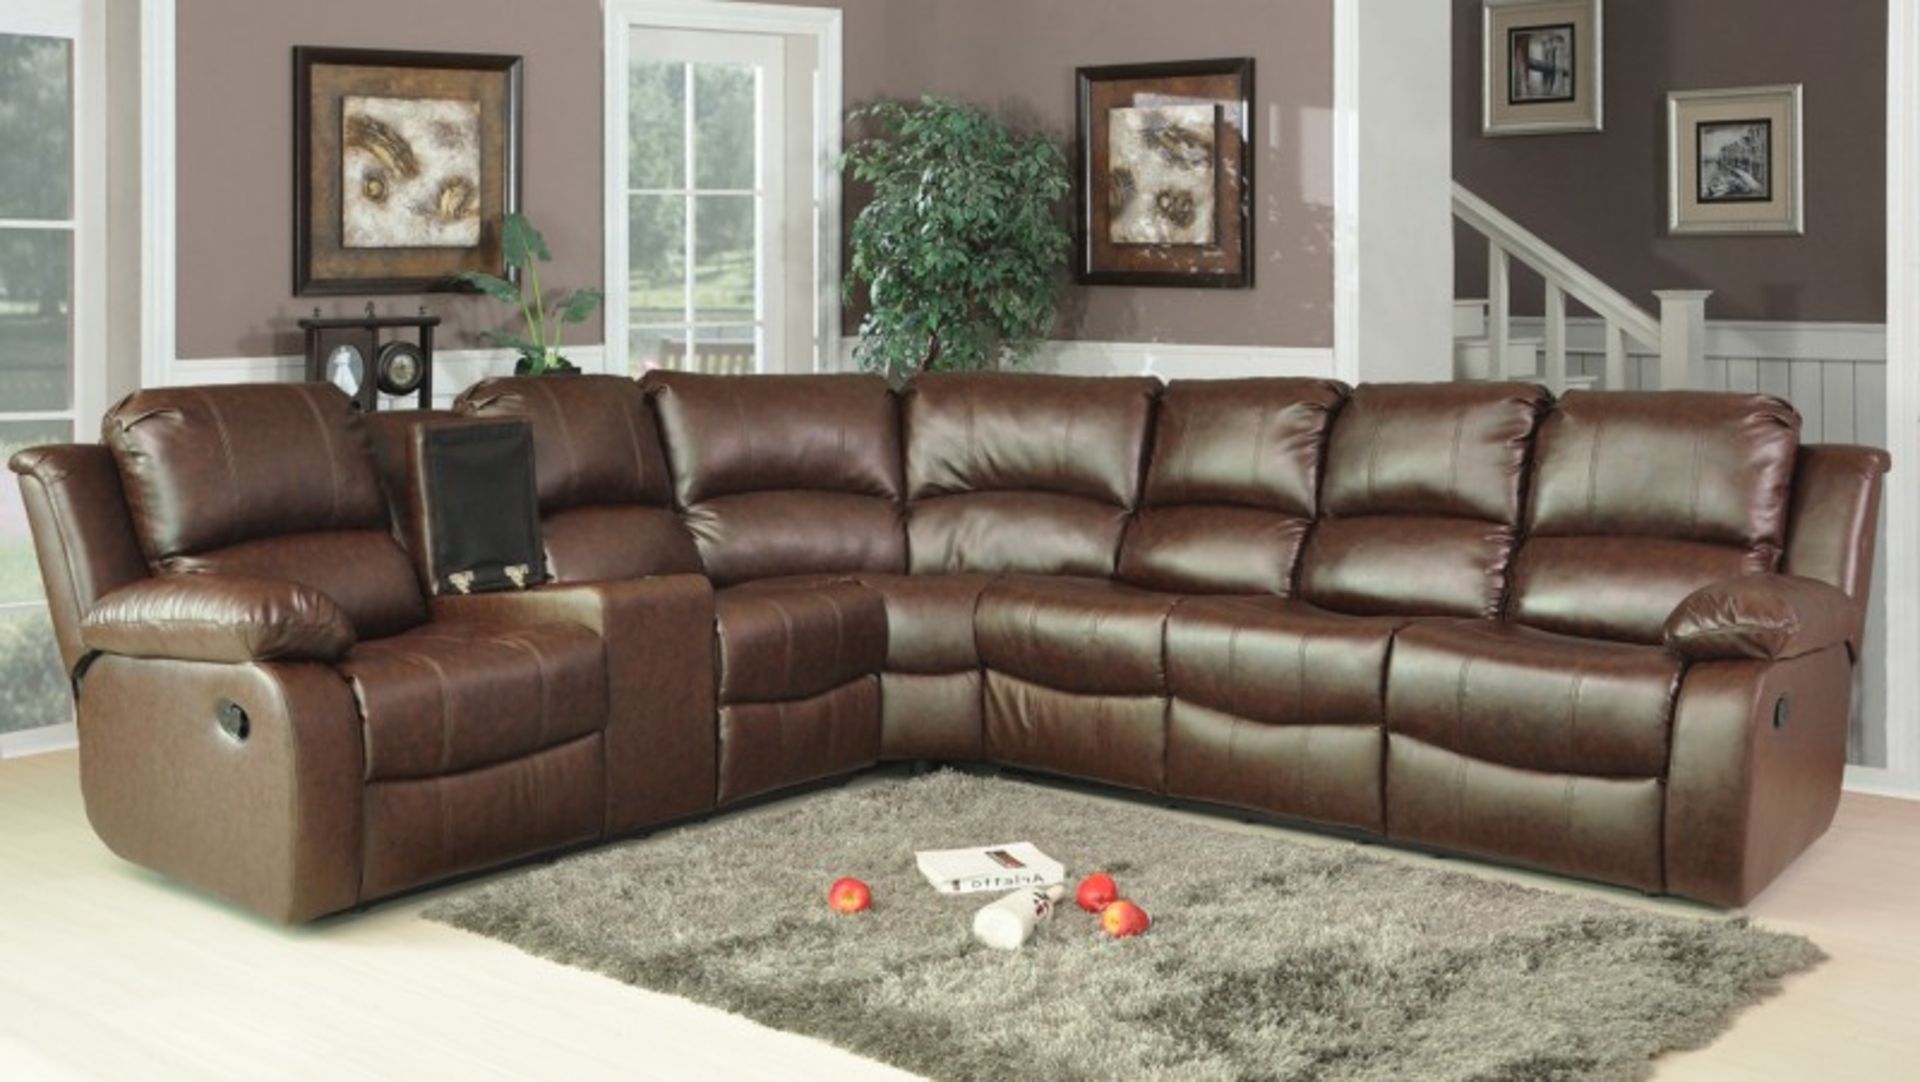 Brand new boxed direct from the manufacturers supreme valance leather reclining corner sofa with con